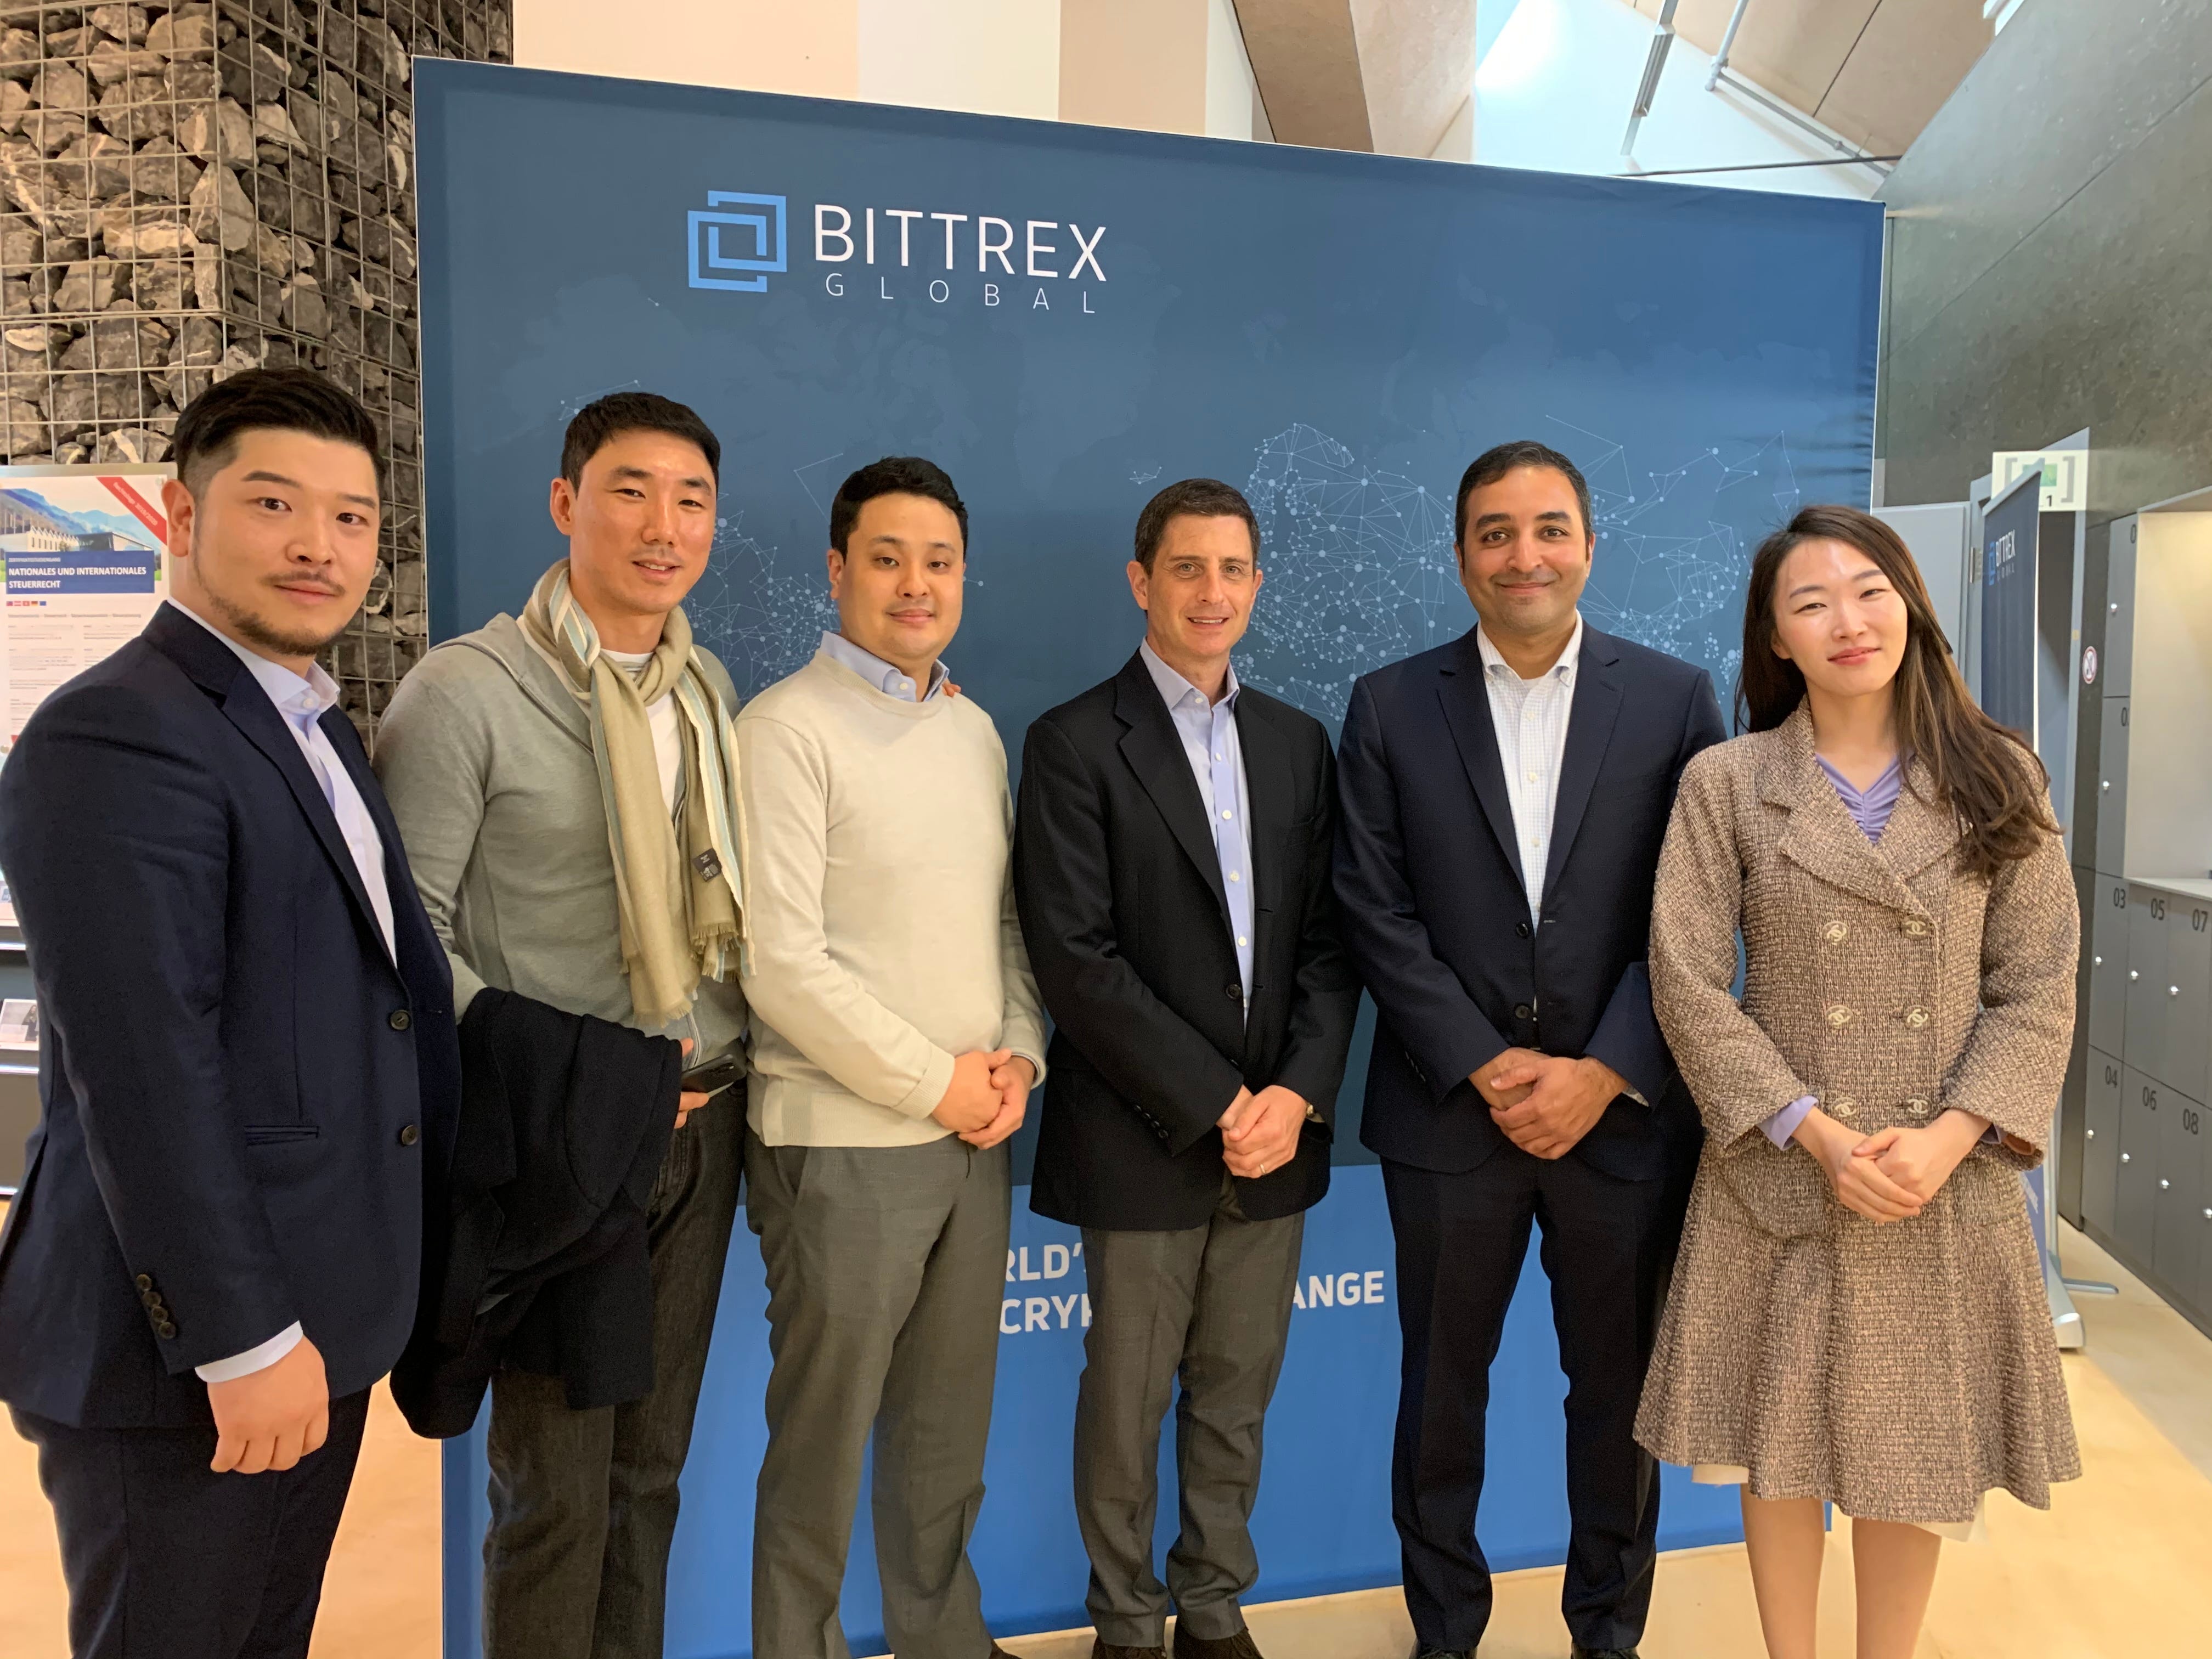 Royal welcome for Bittrex Global in Vaduz | by Bittrex ...